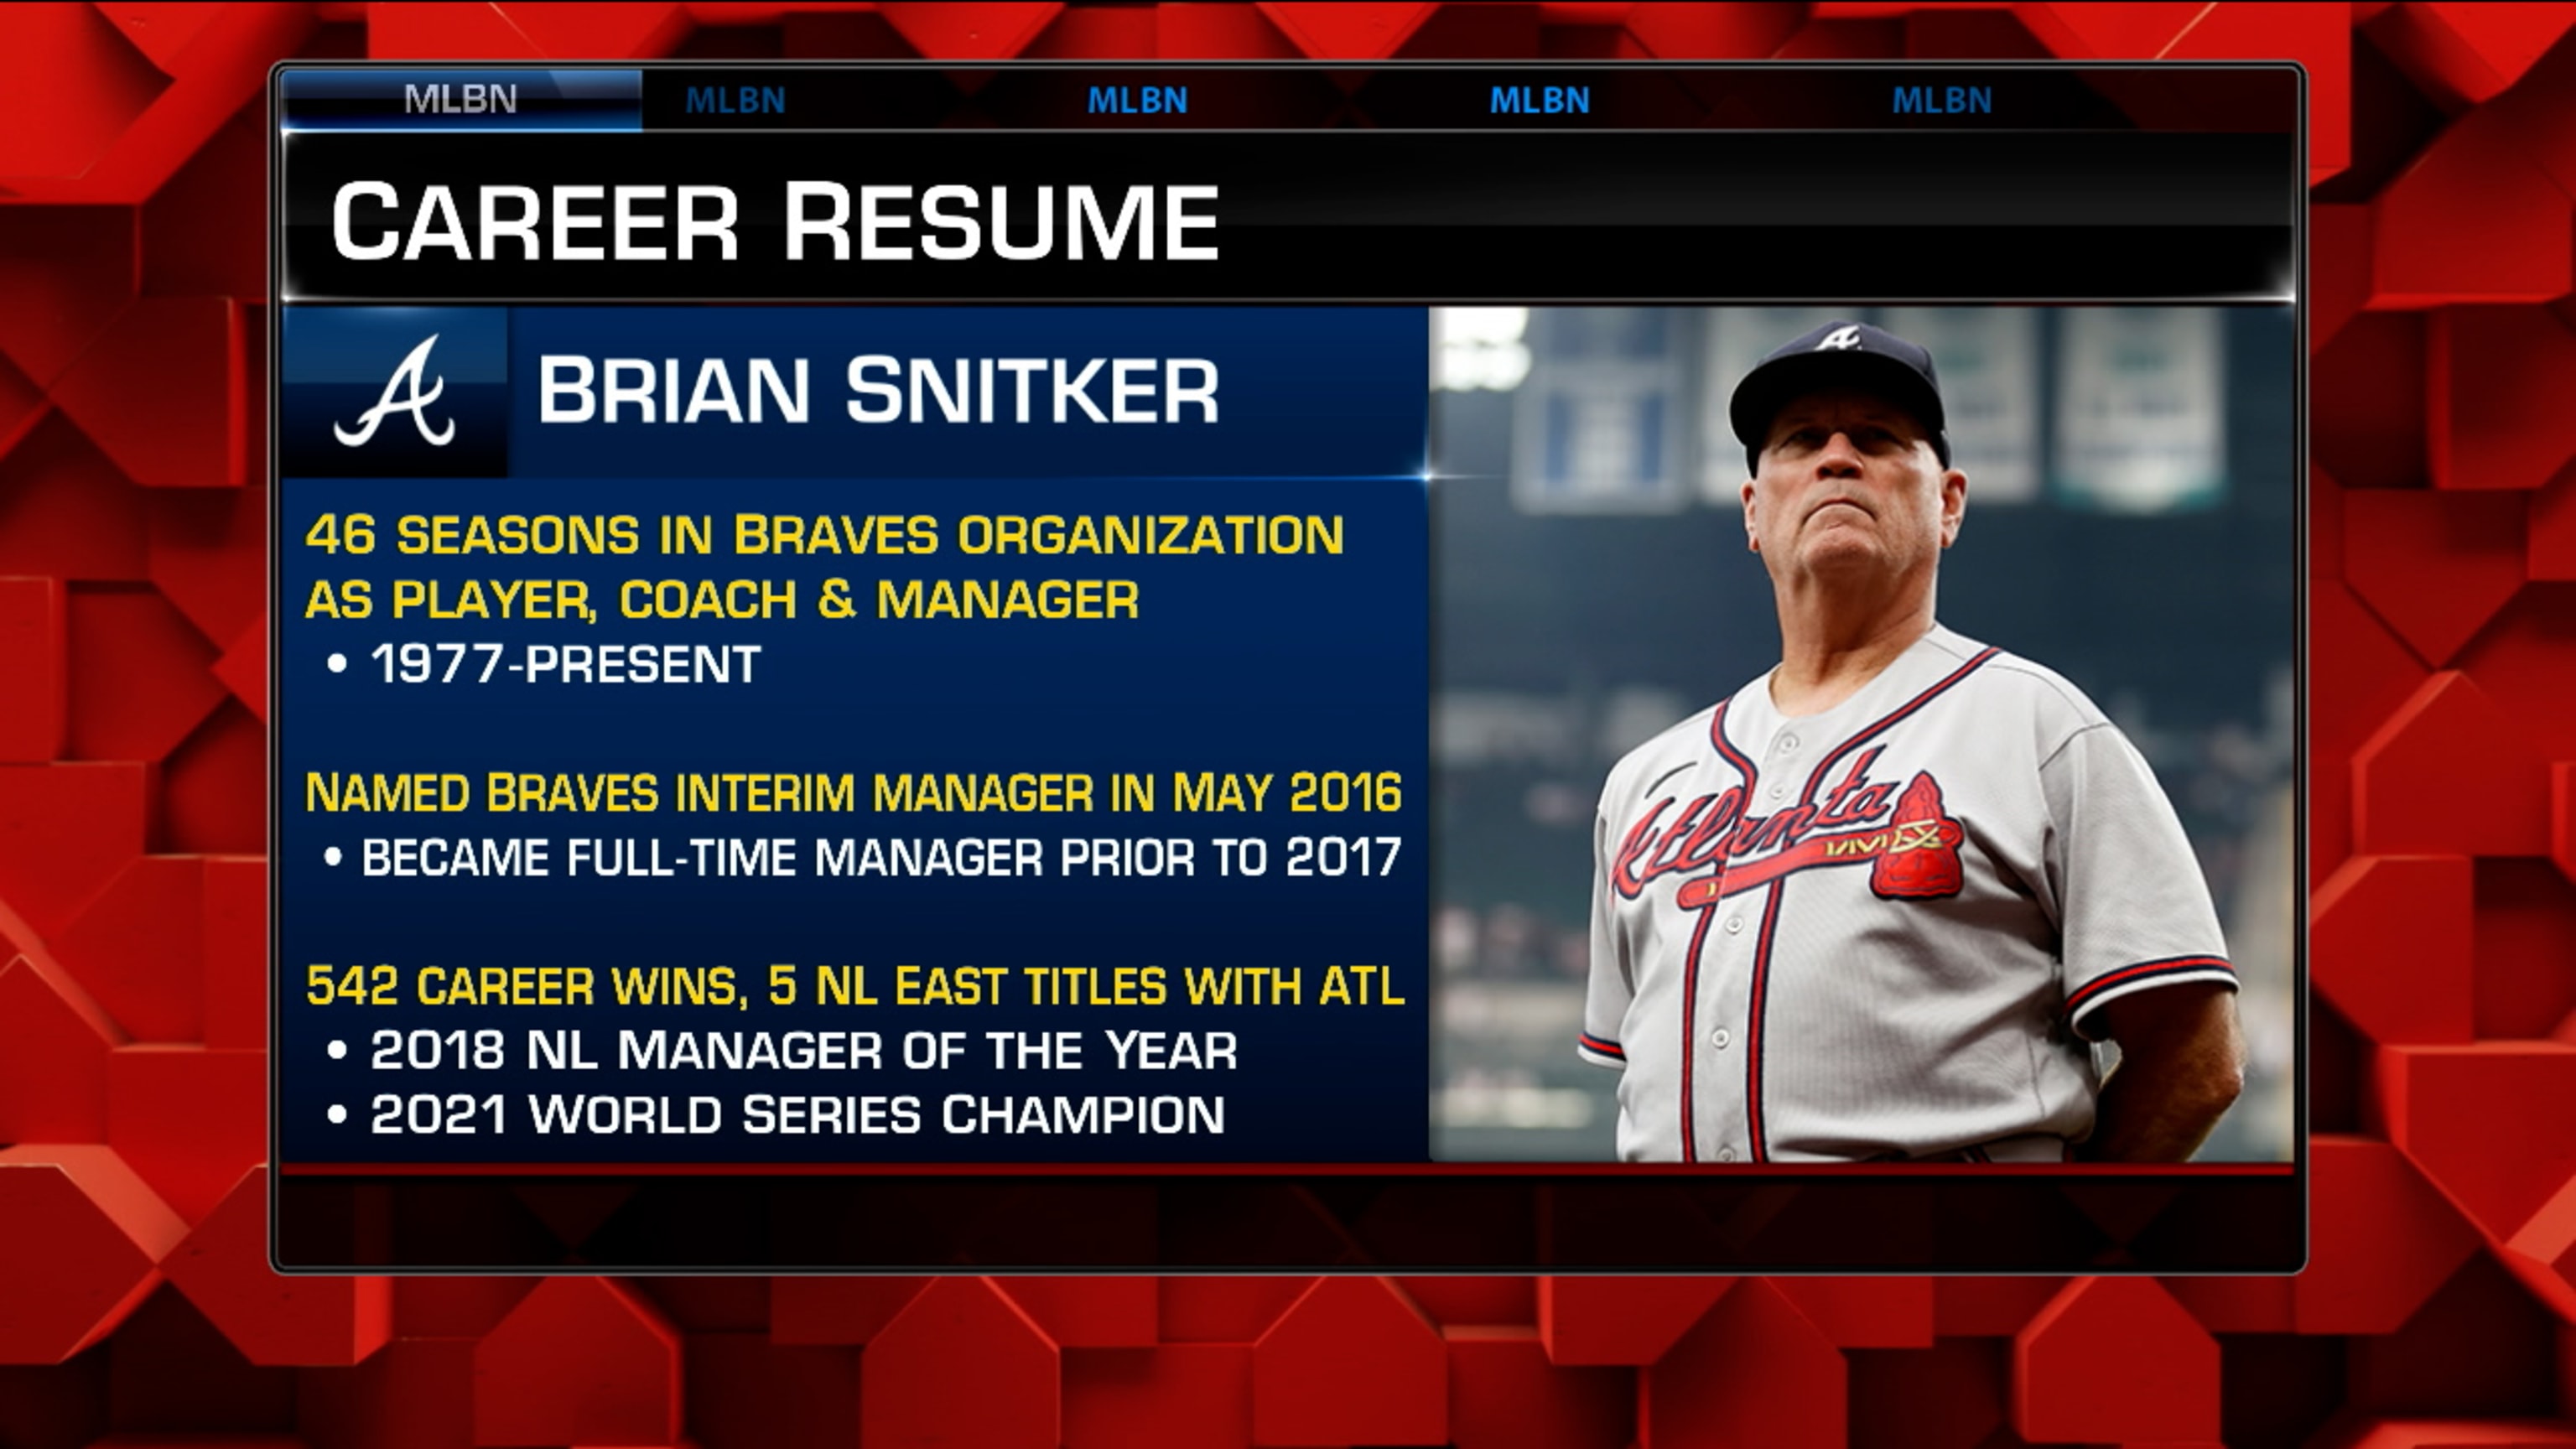 Brian Snitker reaches 1,000 games as manager